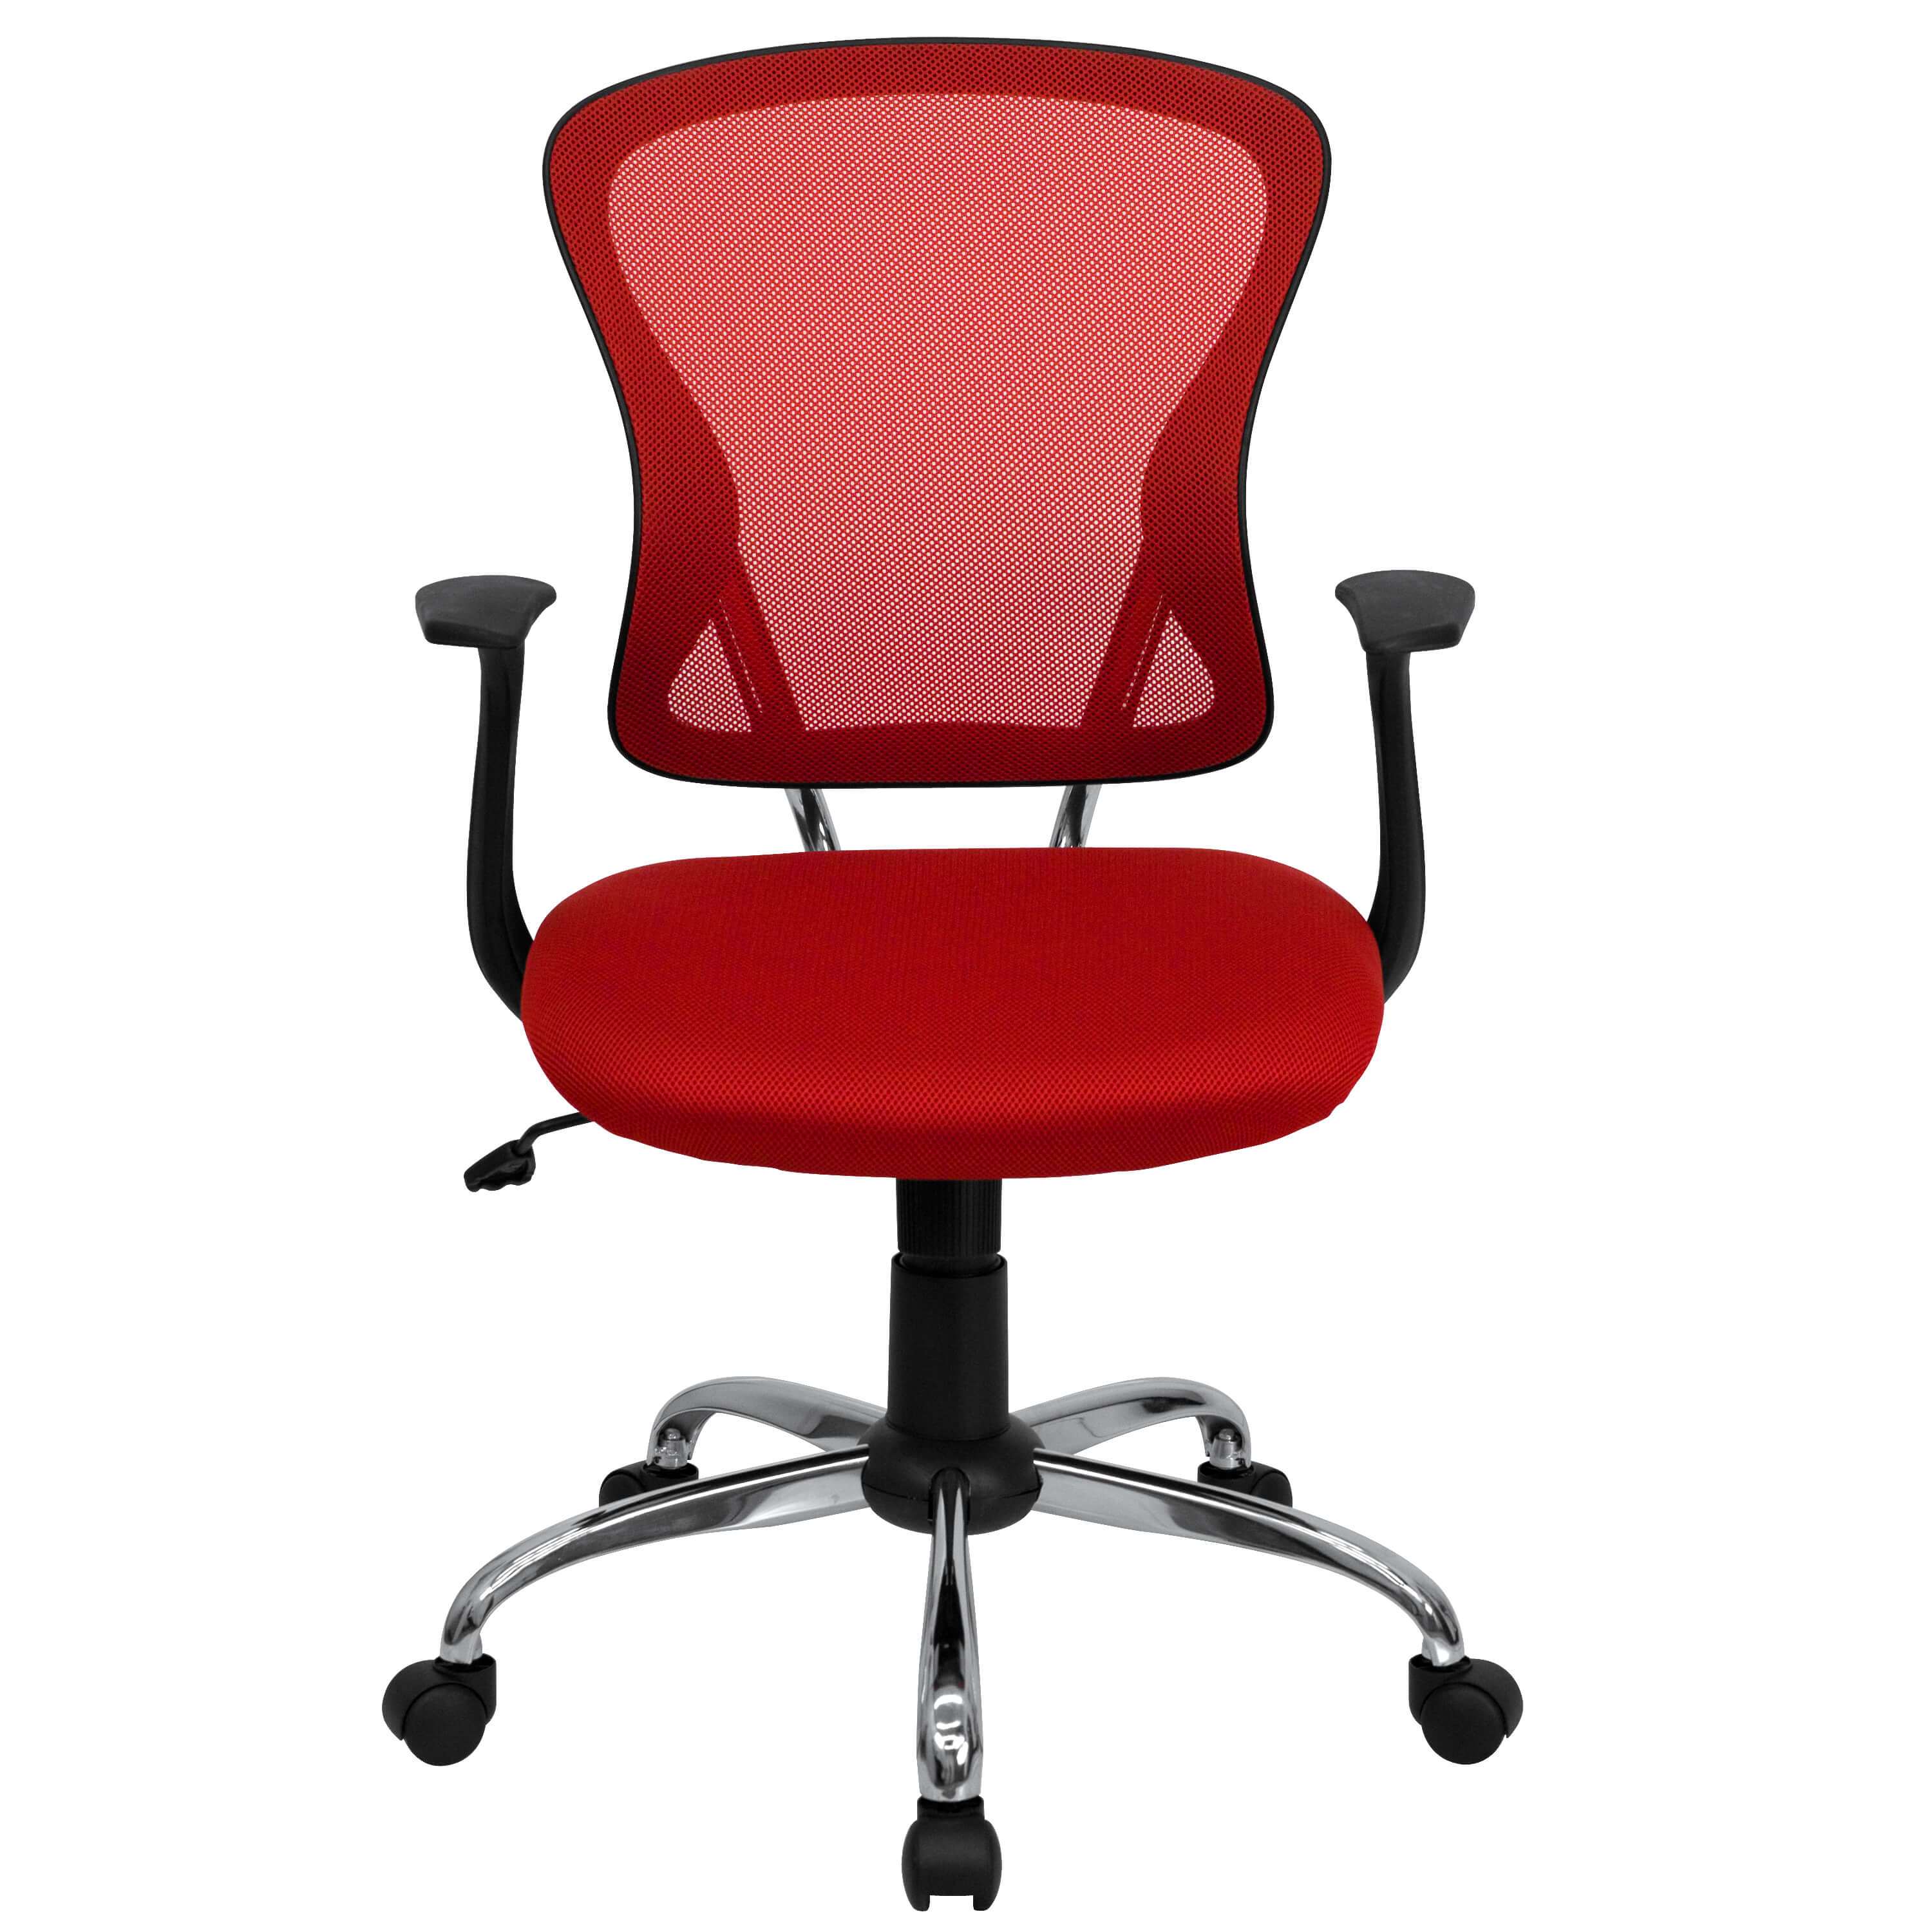 Colorful desk chairs CUB H 8369F RED GG FLA